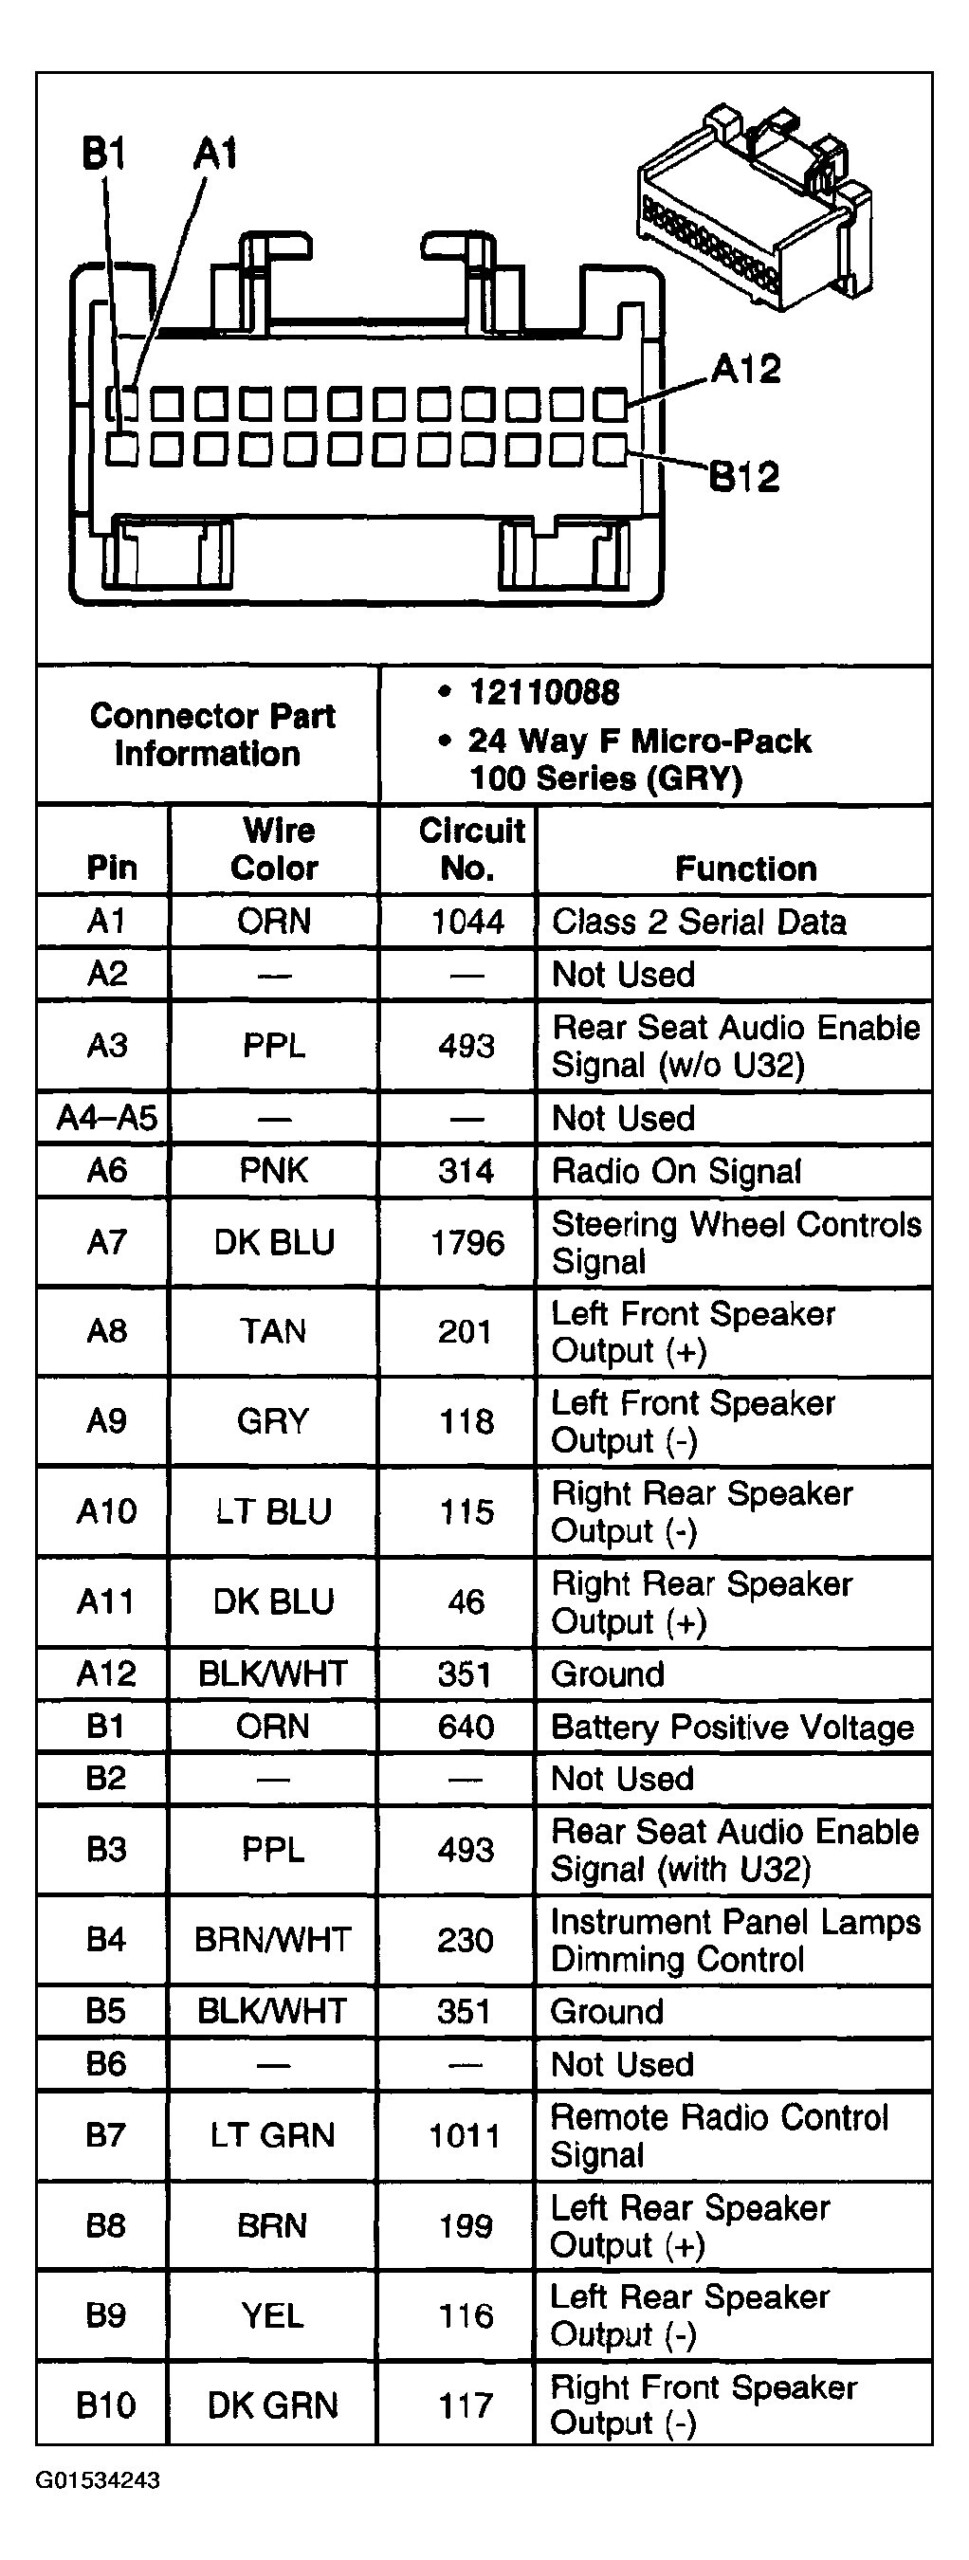 2001 Chevy Malibu Stereo Wiring Diagram Collection Wiring Diagram